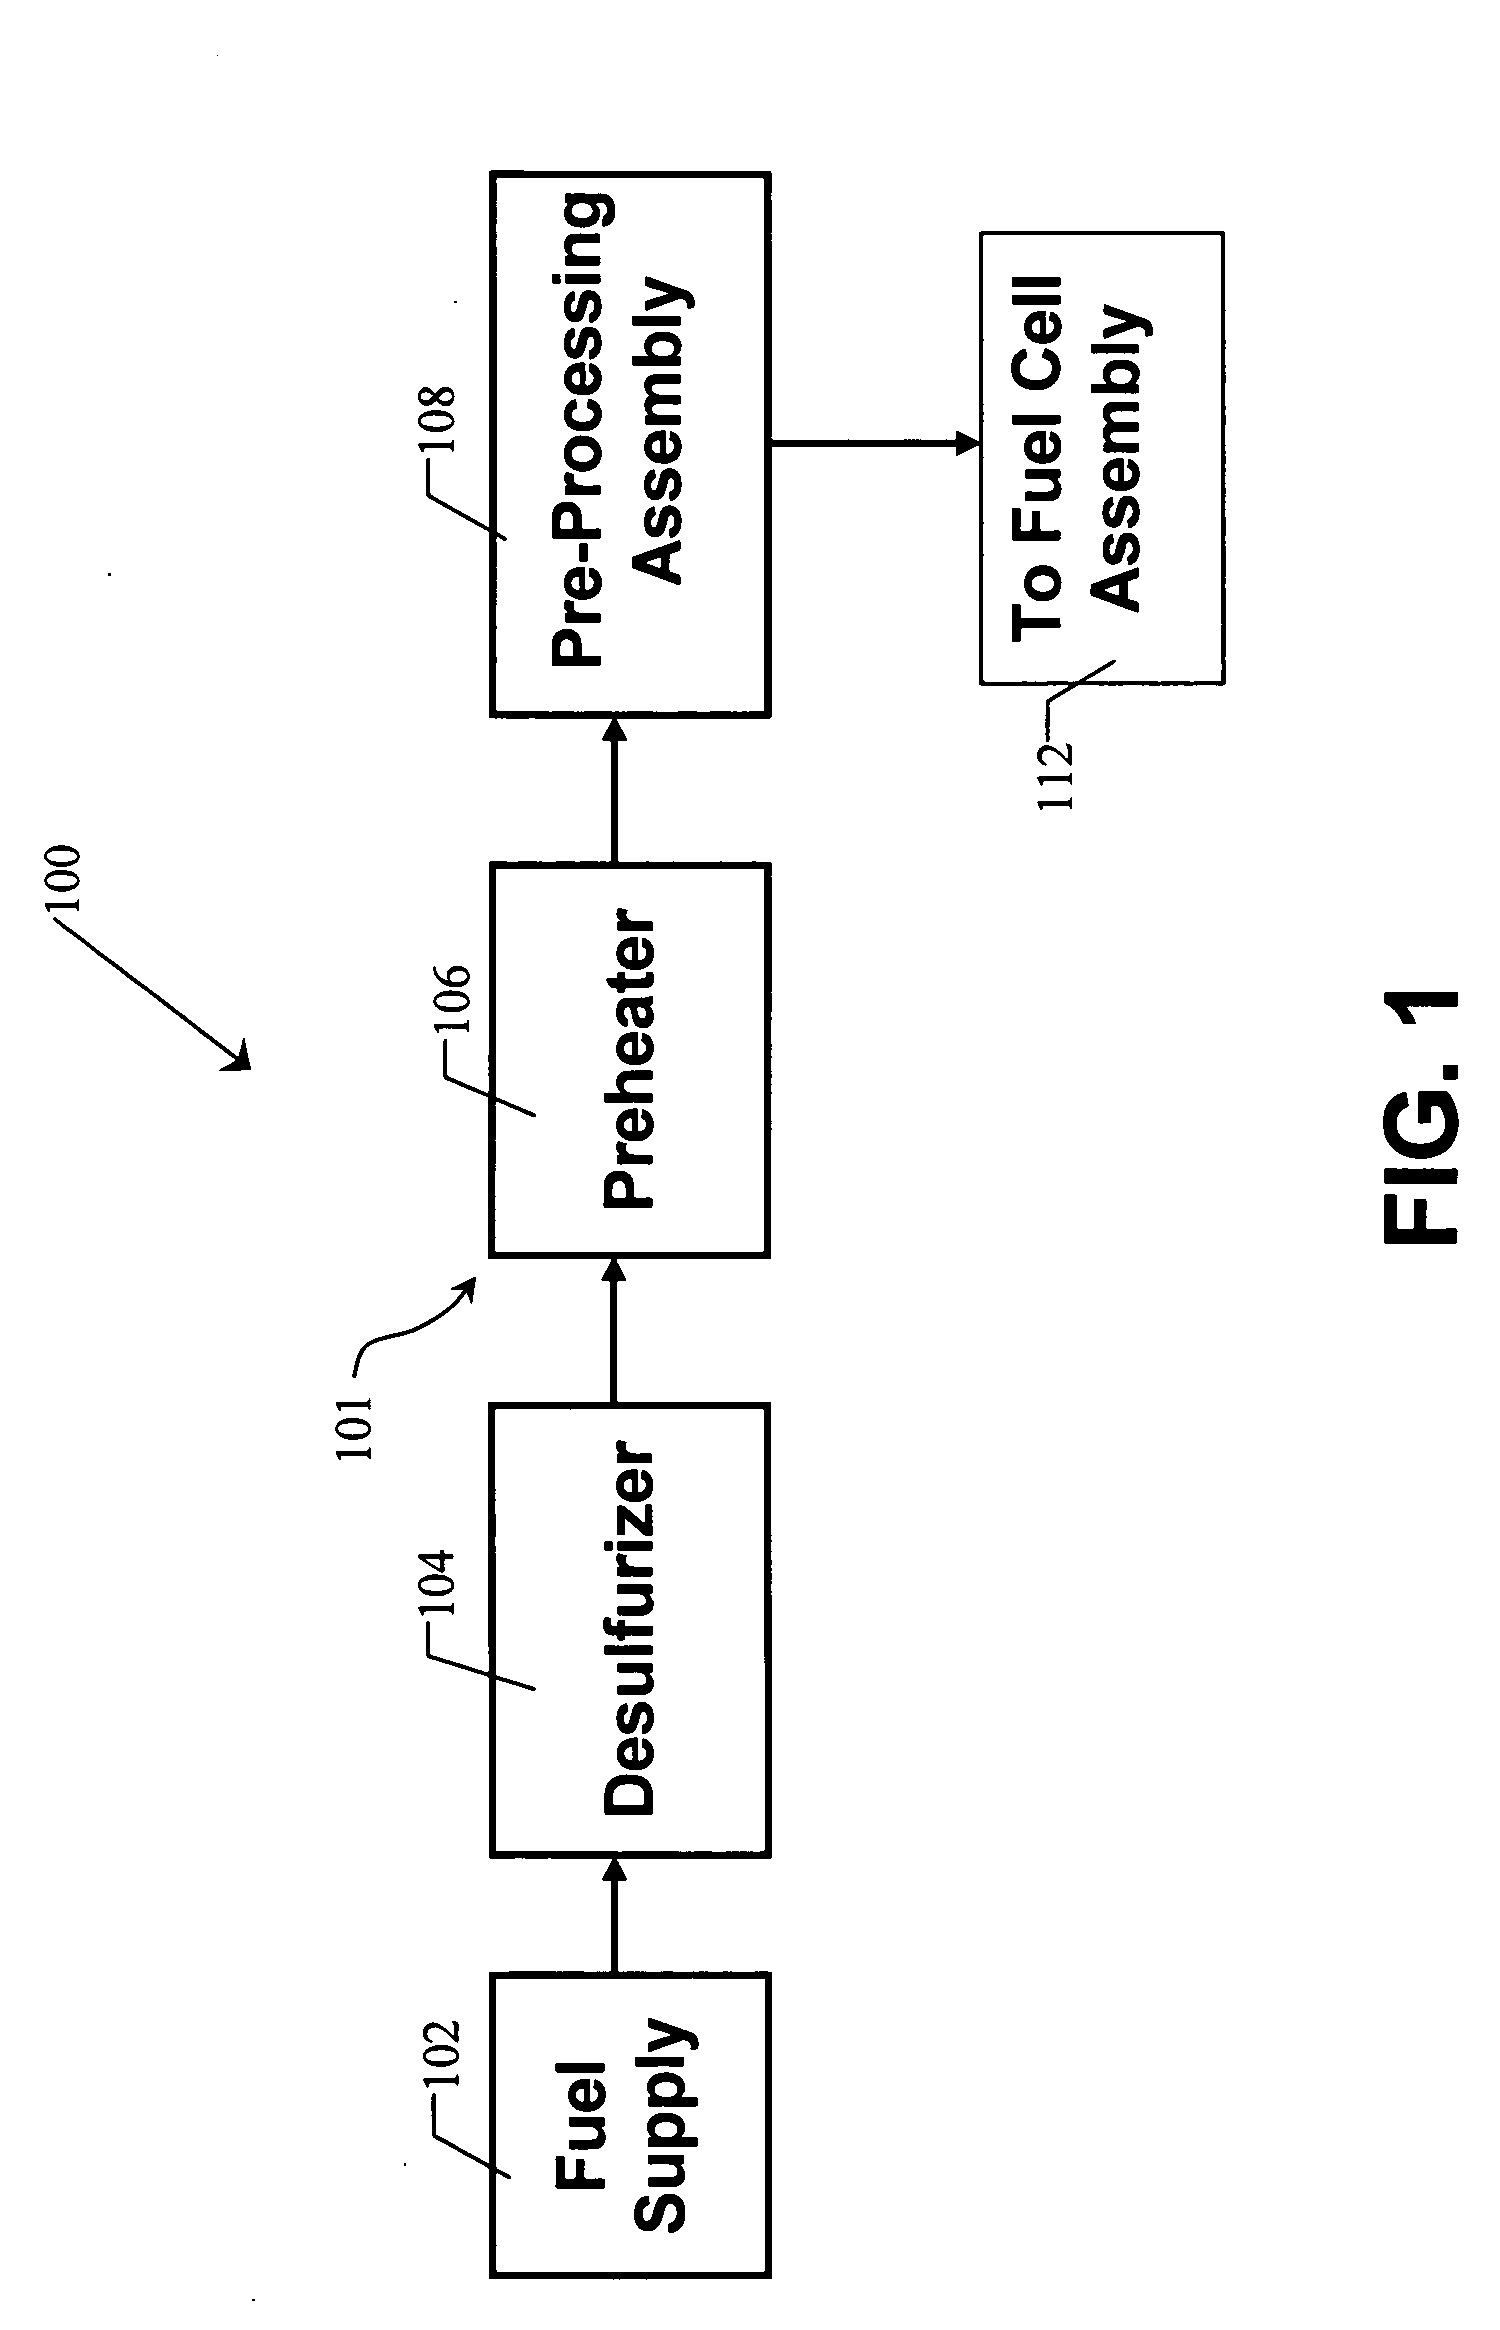 Pre-processing assembly for pre-processing fuel feedstocks for use in a fuel cell system